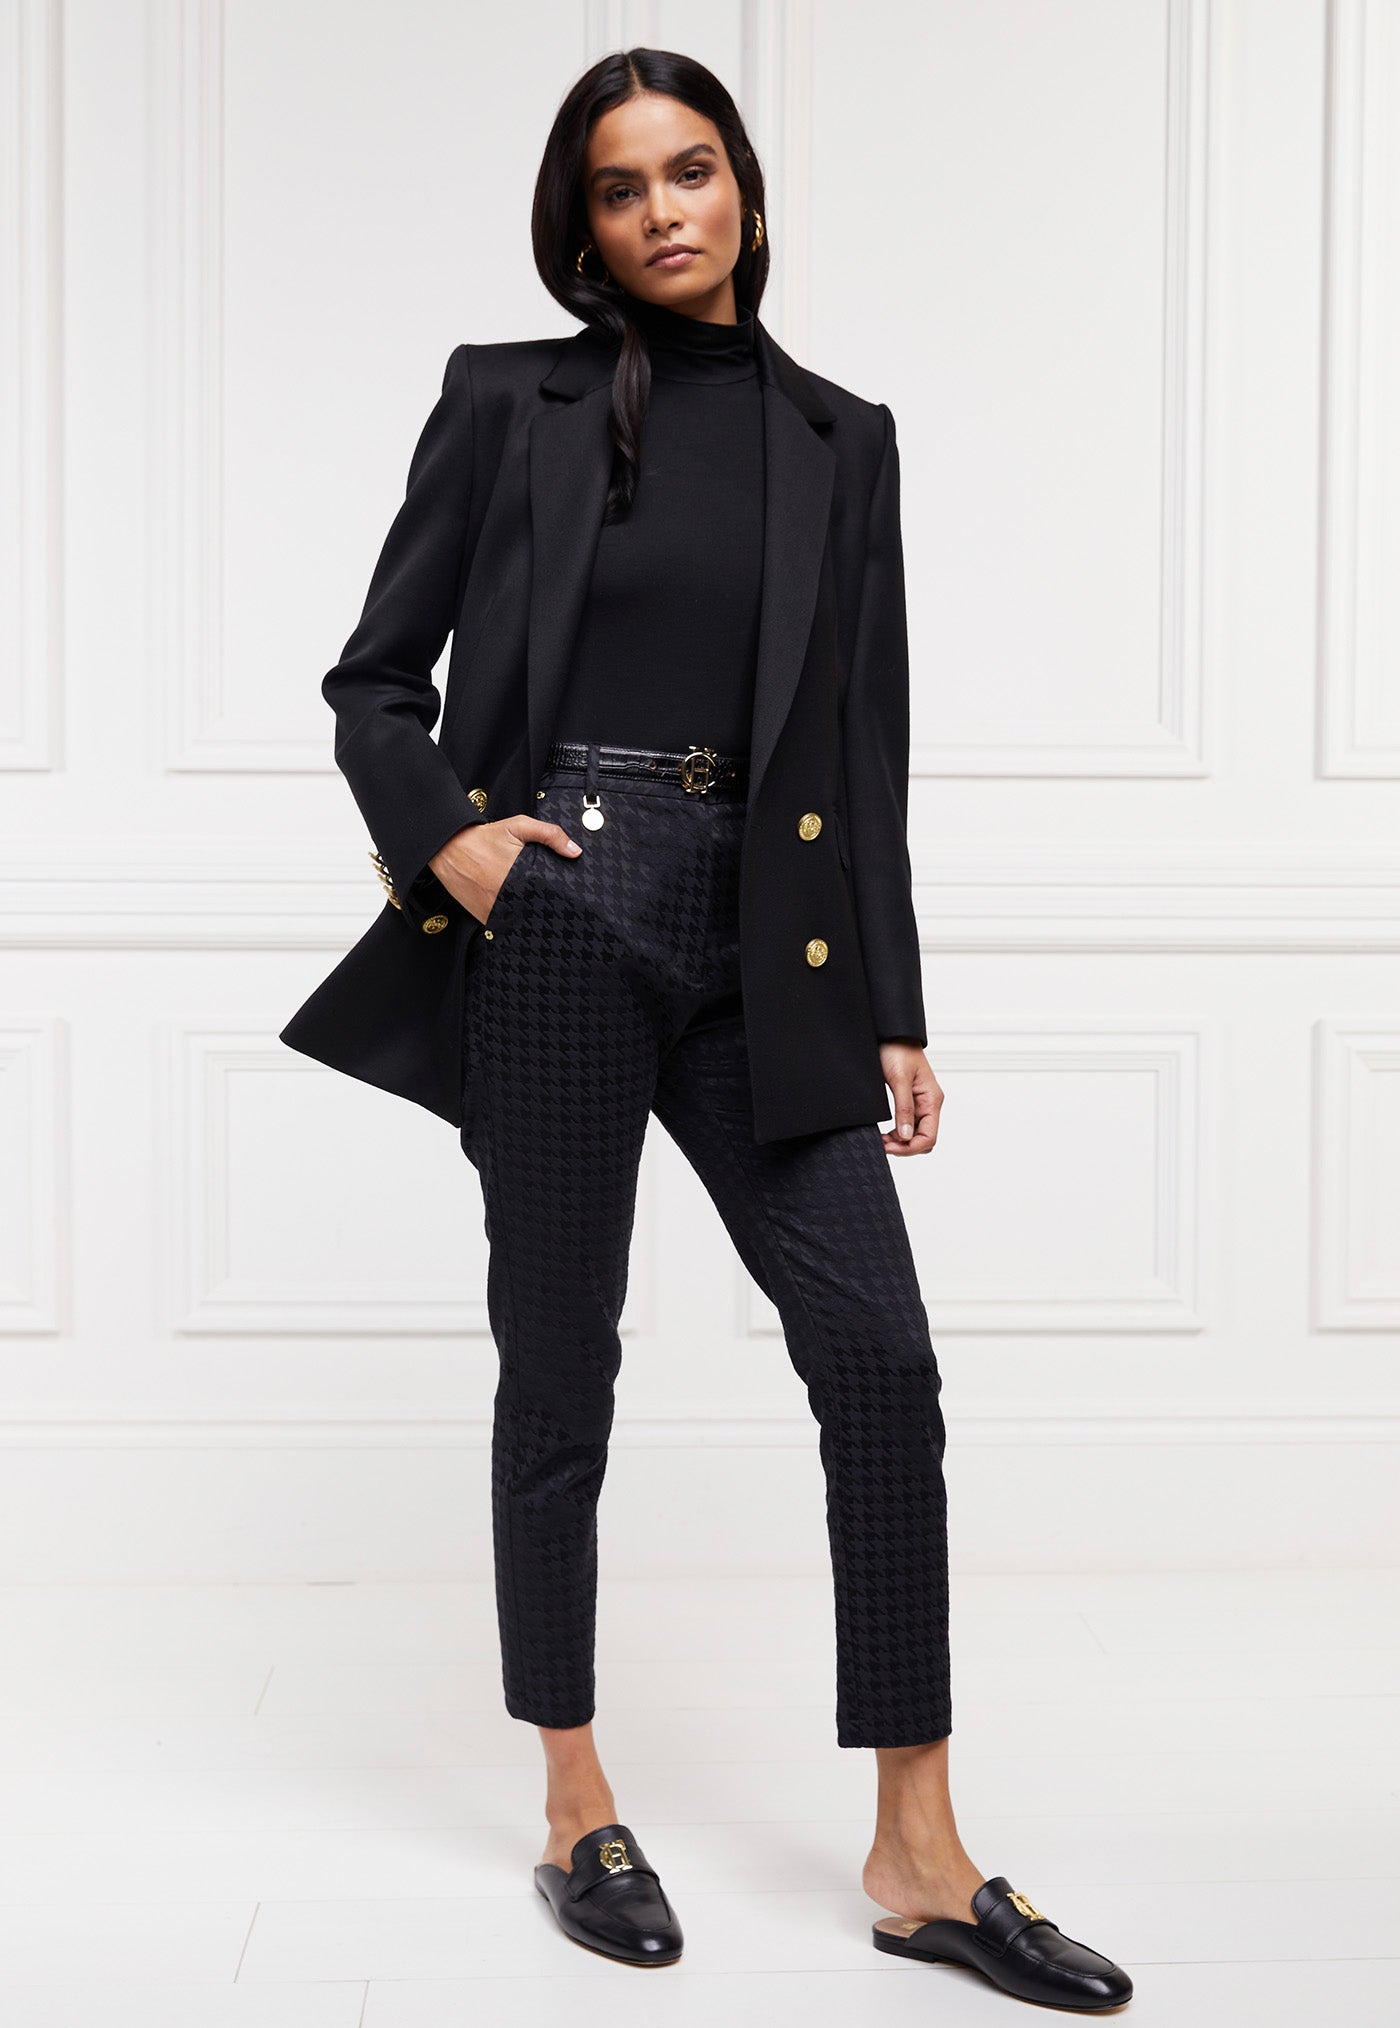 Bexley Tailored Trouser - Houndstooth Jacquard sold by Angel Divine